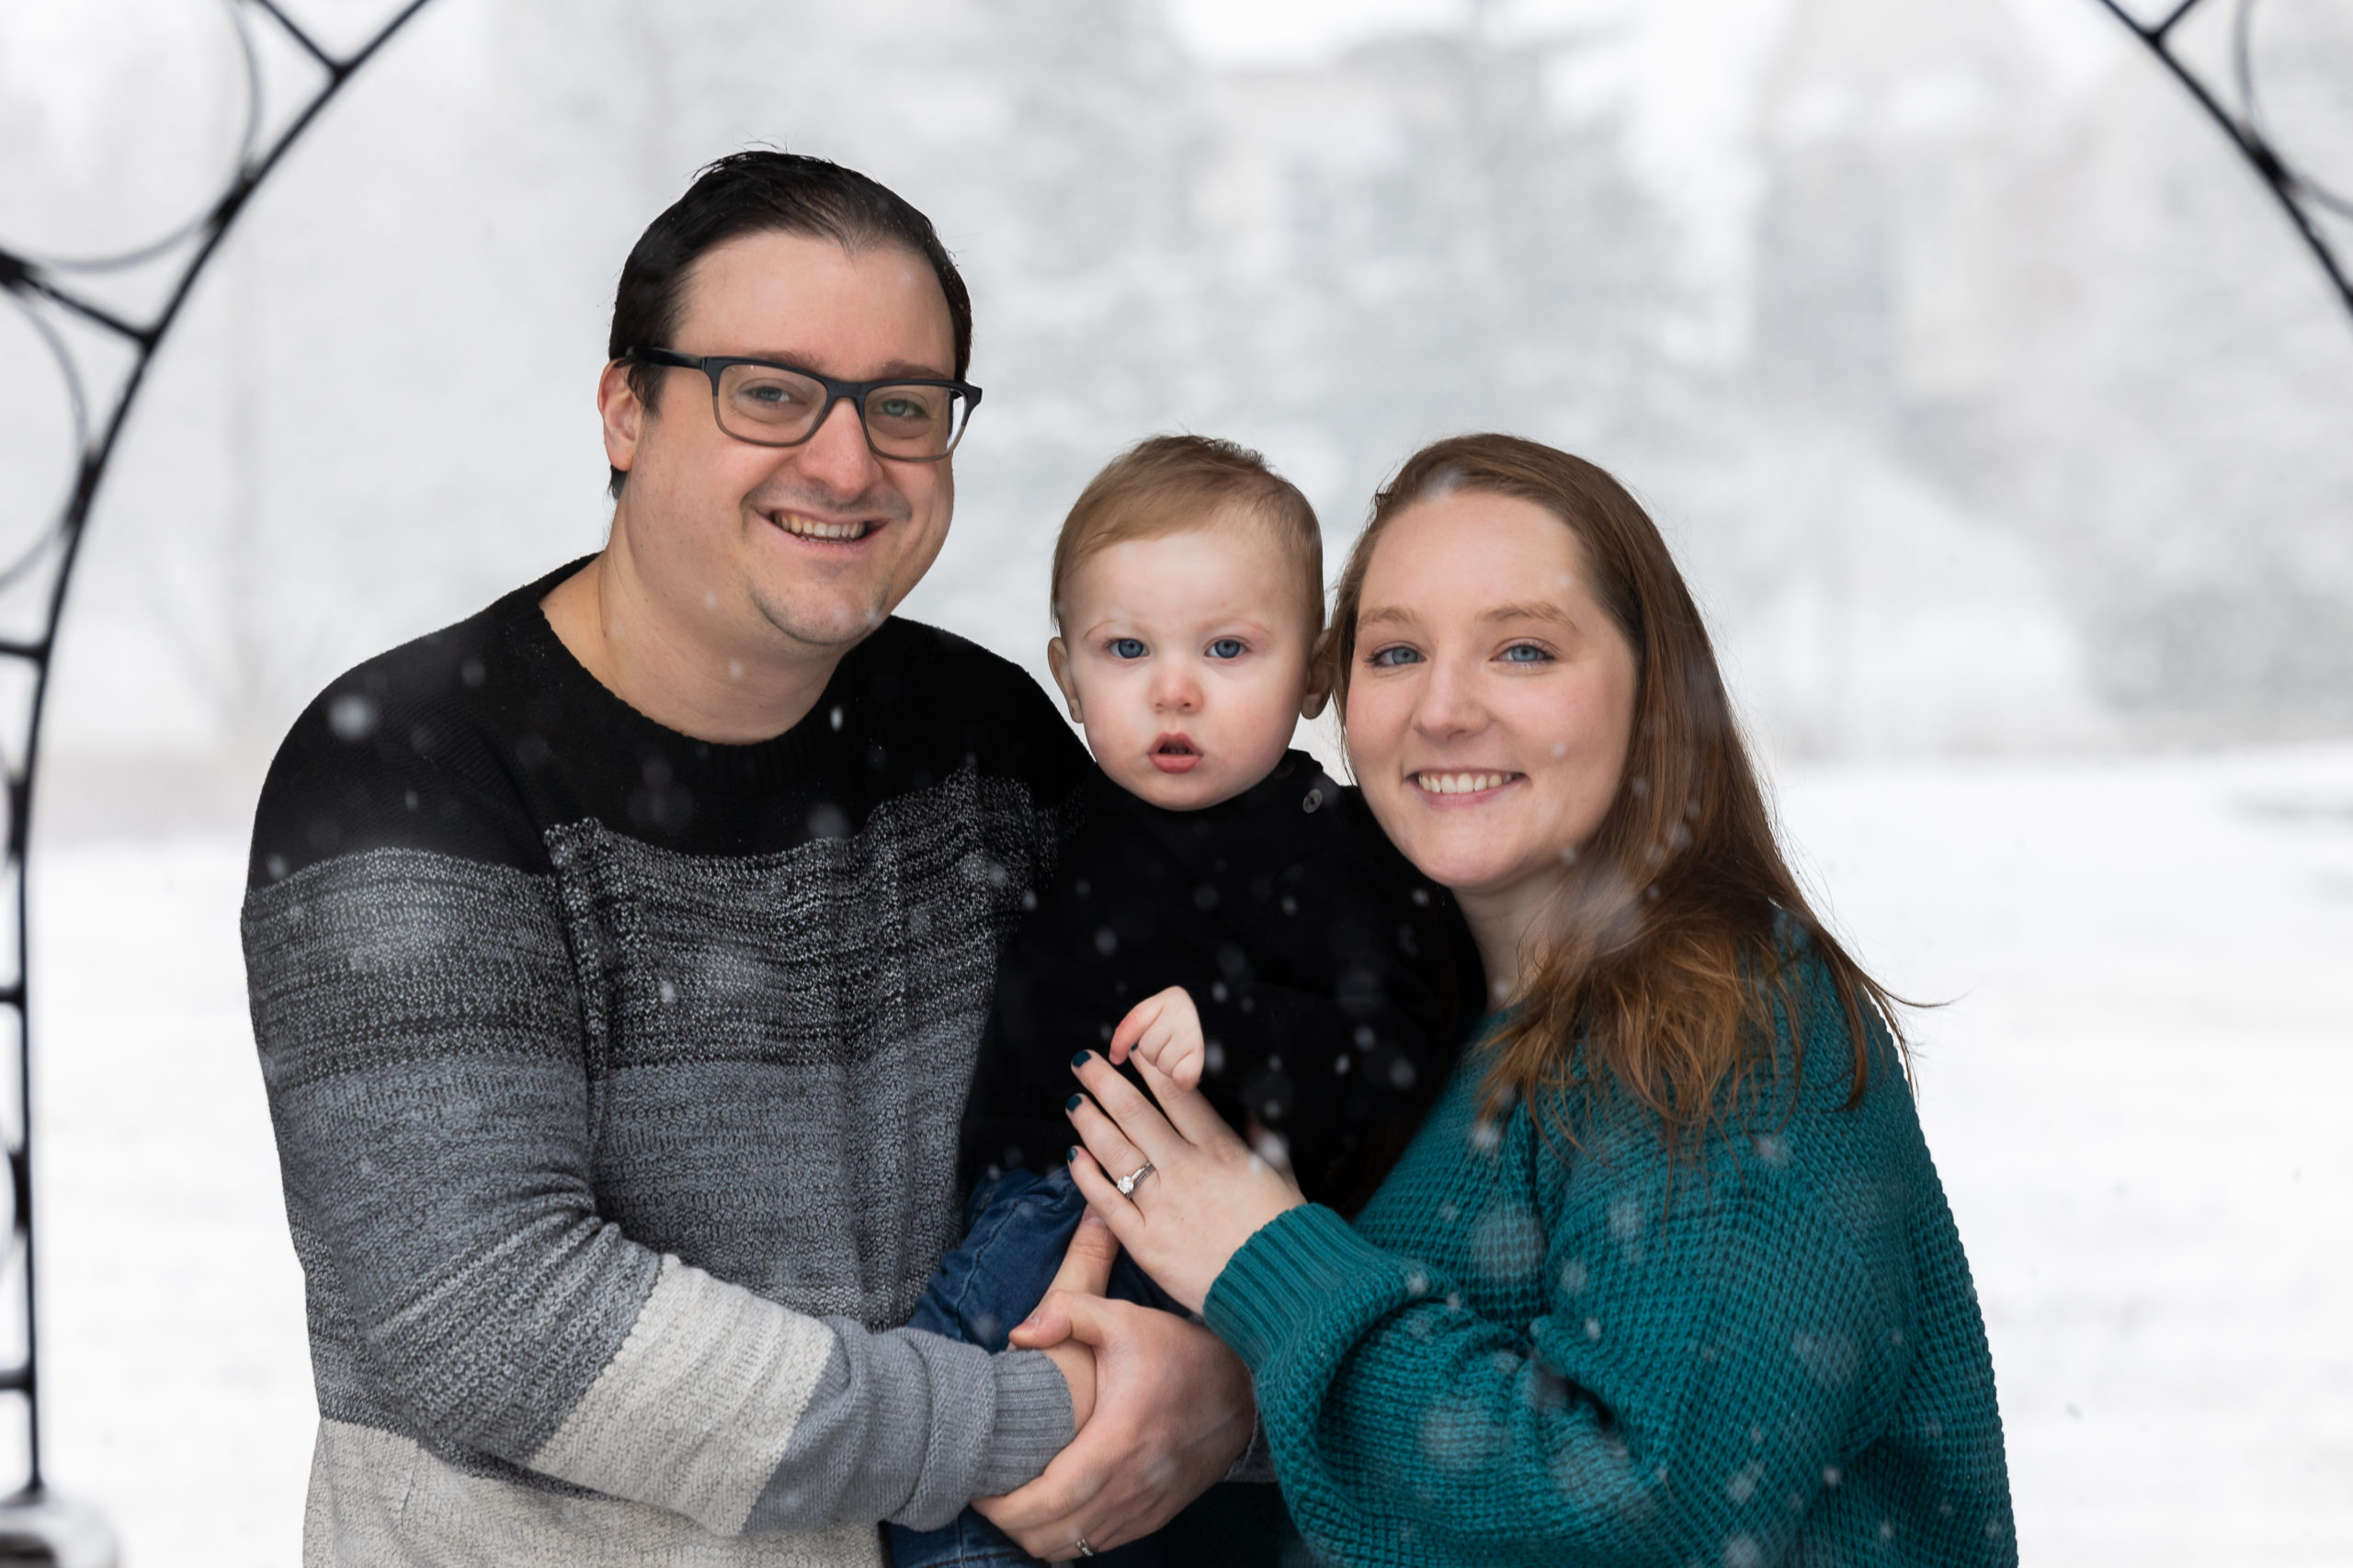 Family photos in the snow.